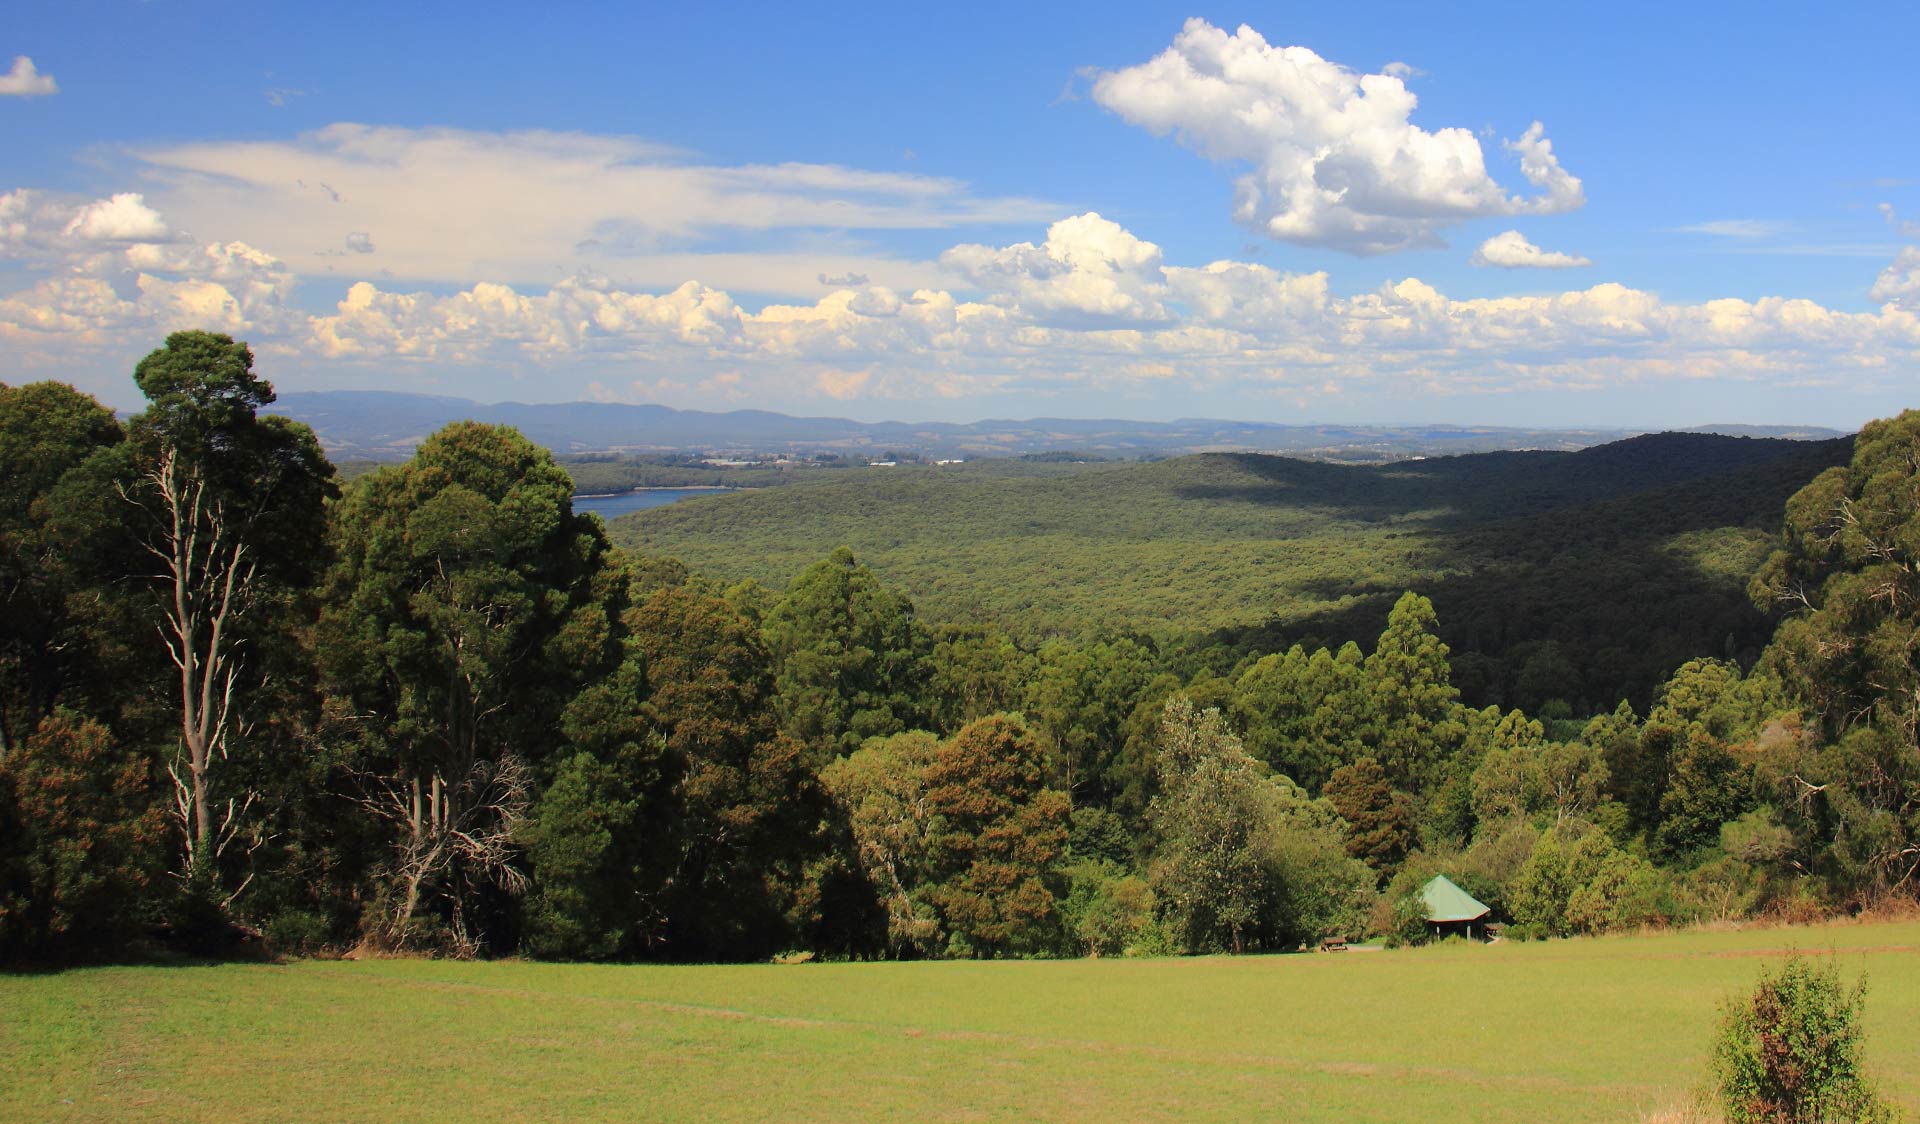 The stunning view from the top of Kalorama Park in the northern section of the Dandenong Ranges National Park.